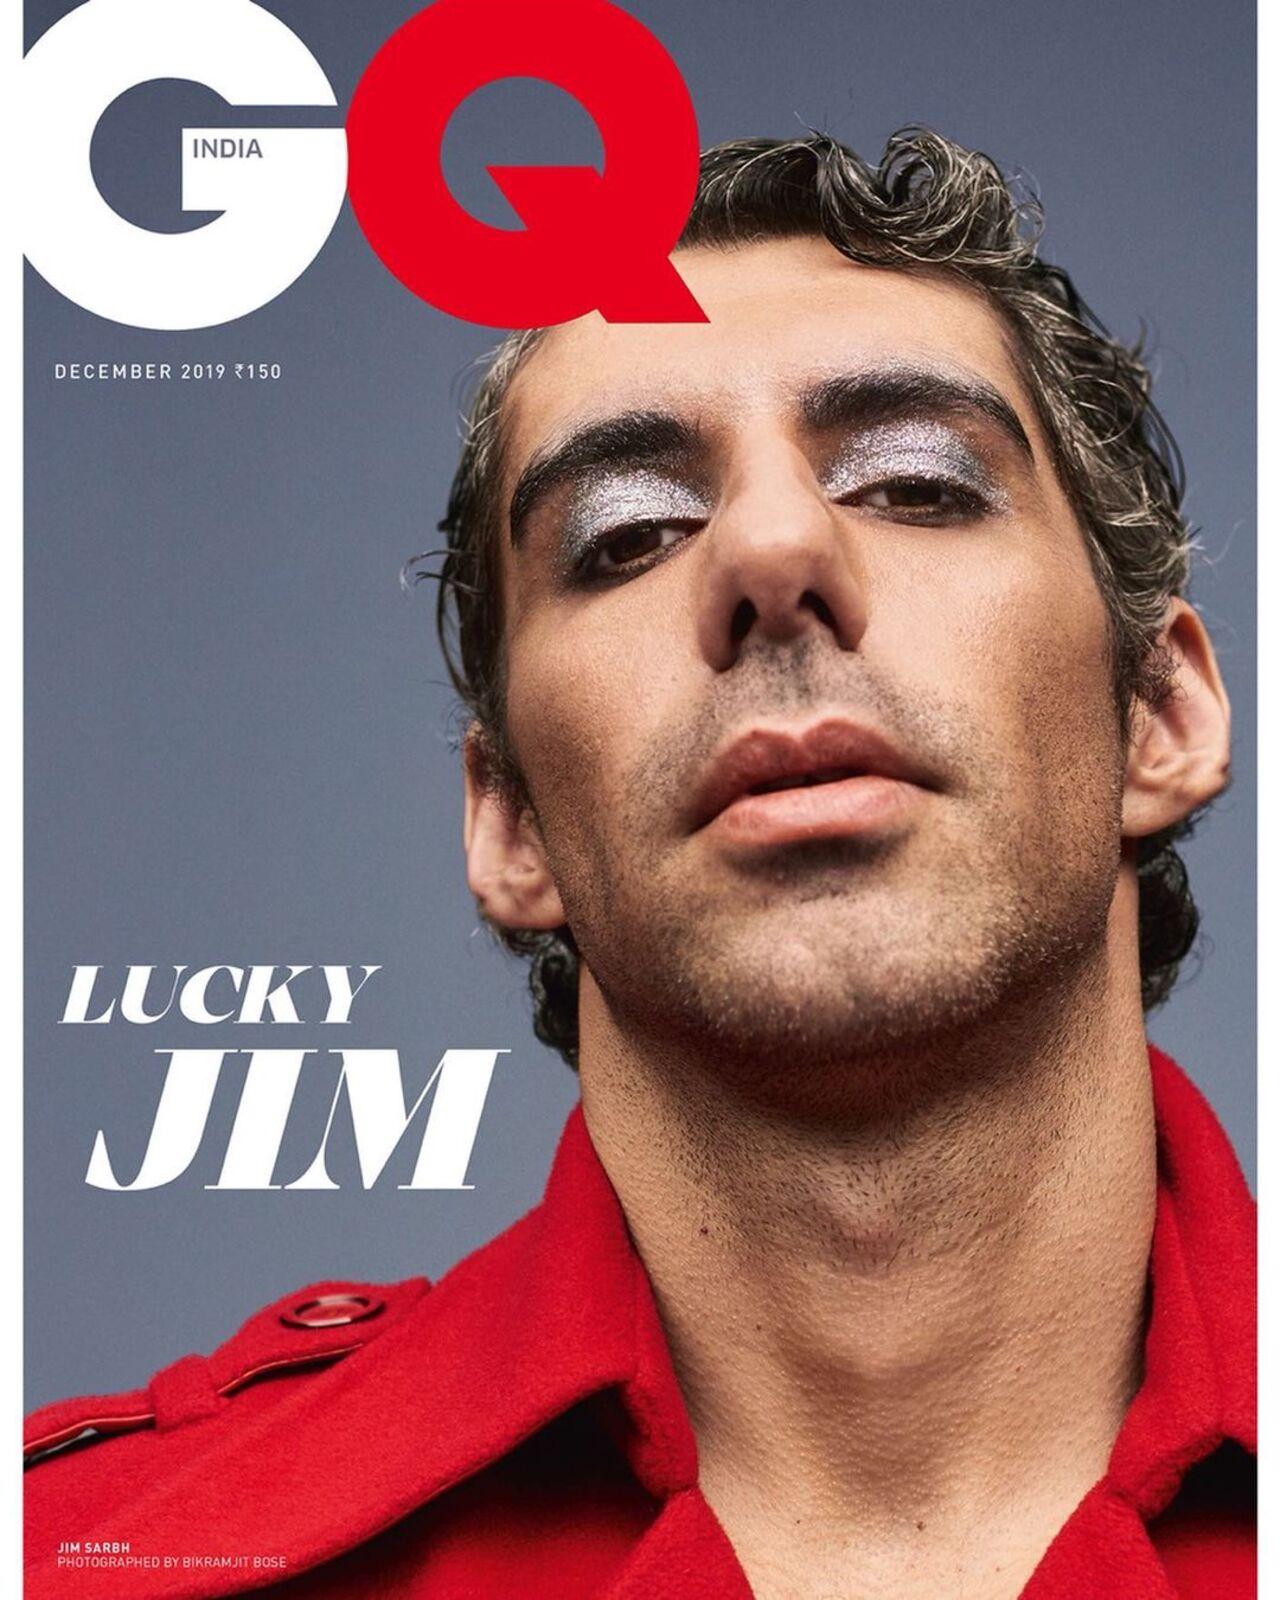 Jim Sarbh has been known to embrace alternative versions of masculinity. A make-up clad Sarbh looked as effortlessly debonair as ever while smashing gender norms, one piece of clothing at a time